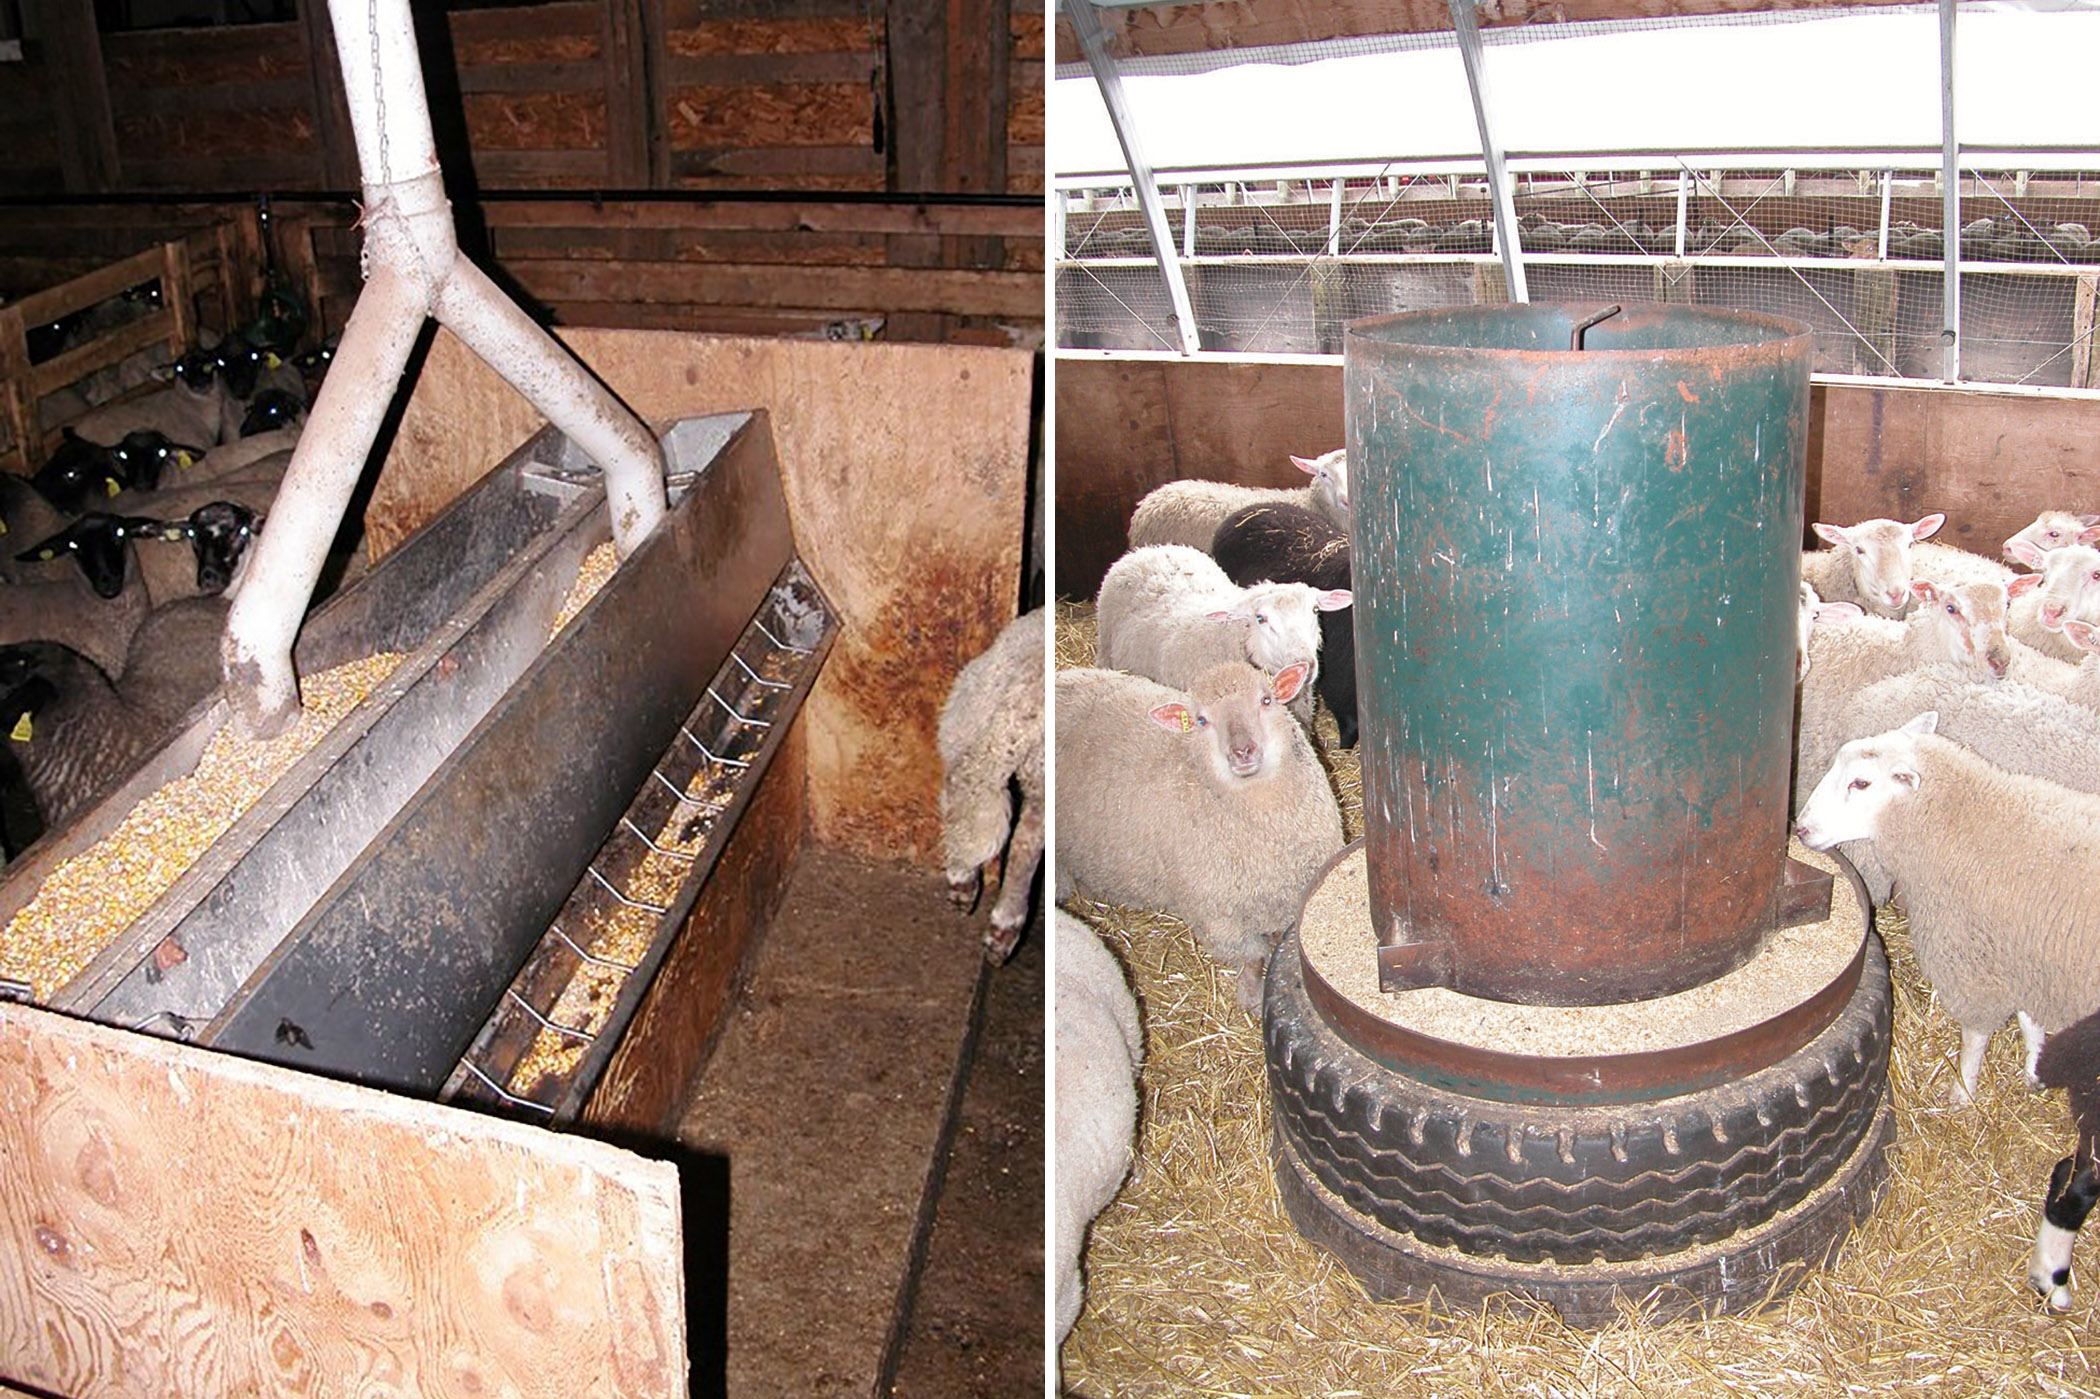 Photo of an interior of a sheep barn showing two rows of pens with overhead feed pipes connected to pipes that descend to each pen. Photo of a round hog feeder raised on a tire surrounded by sheep.